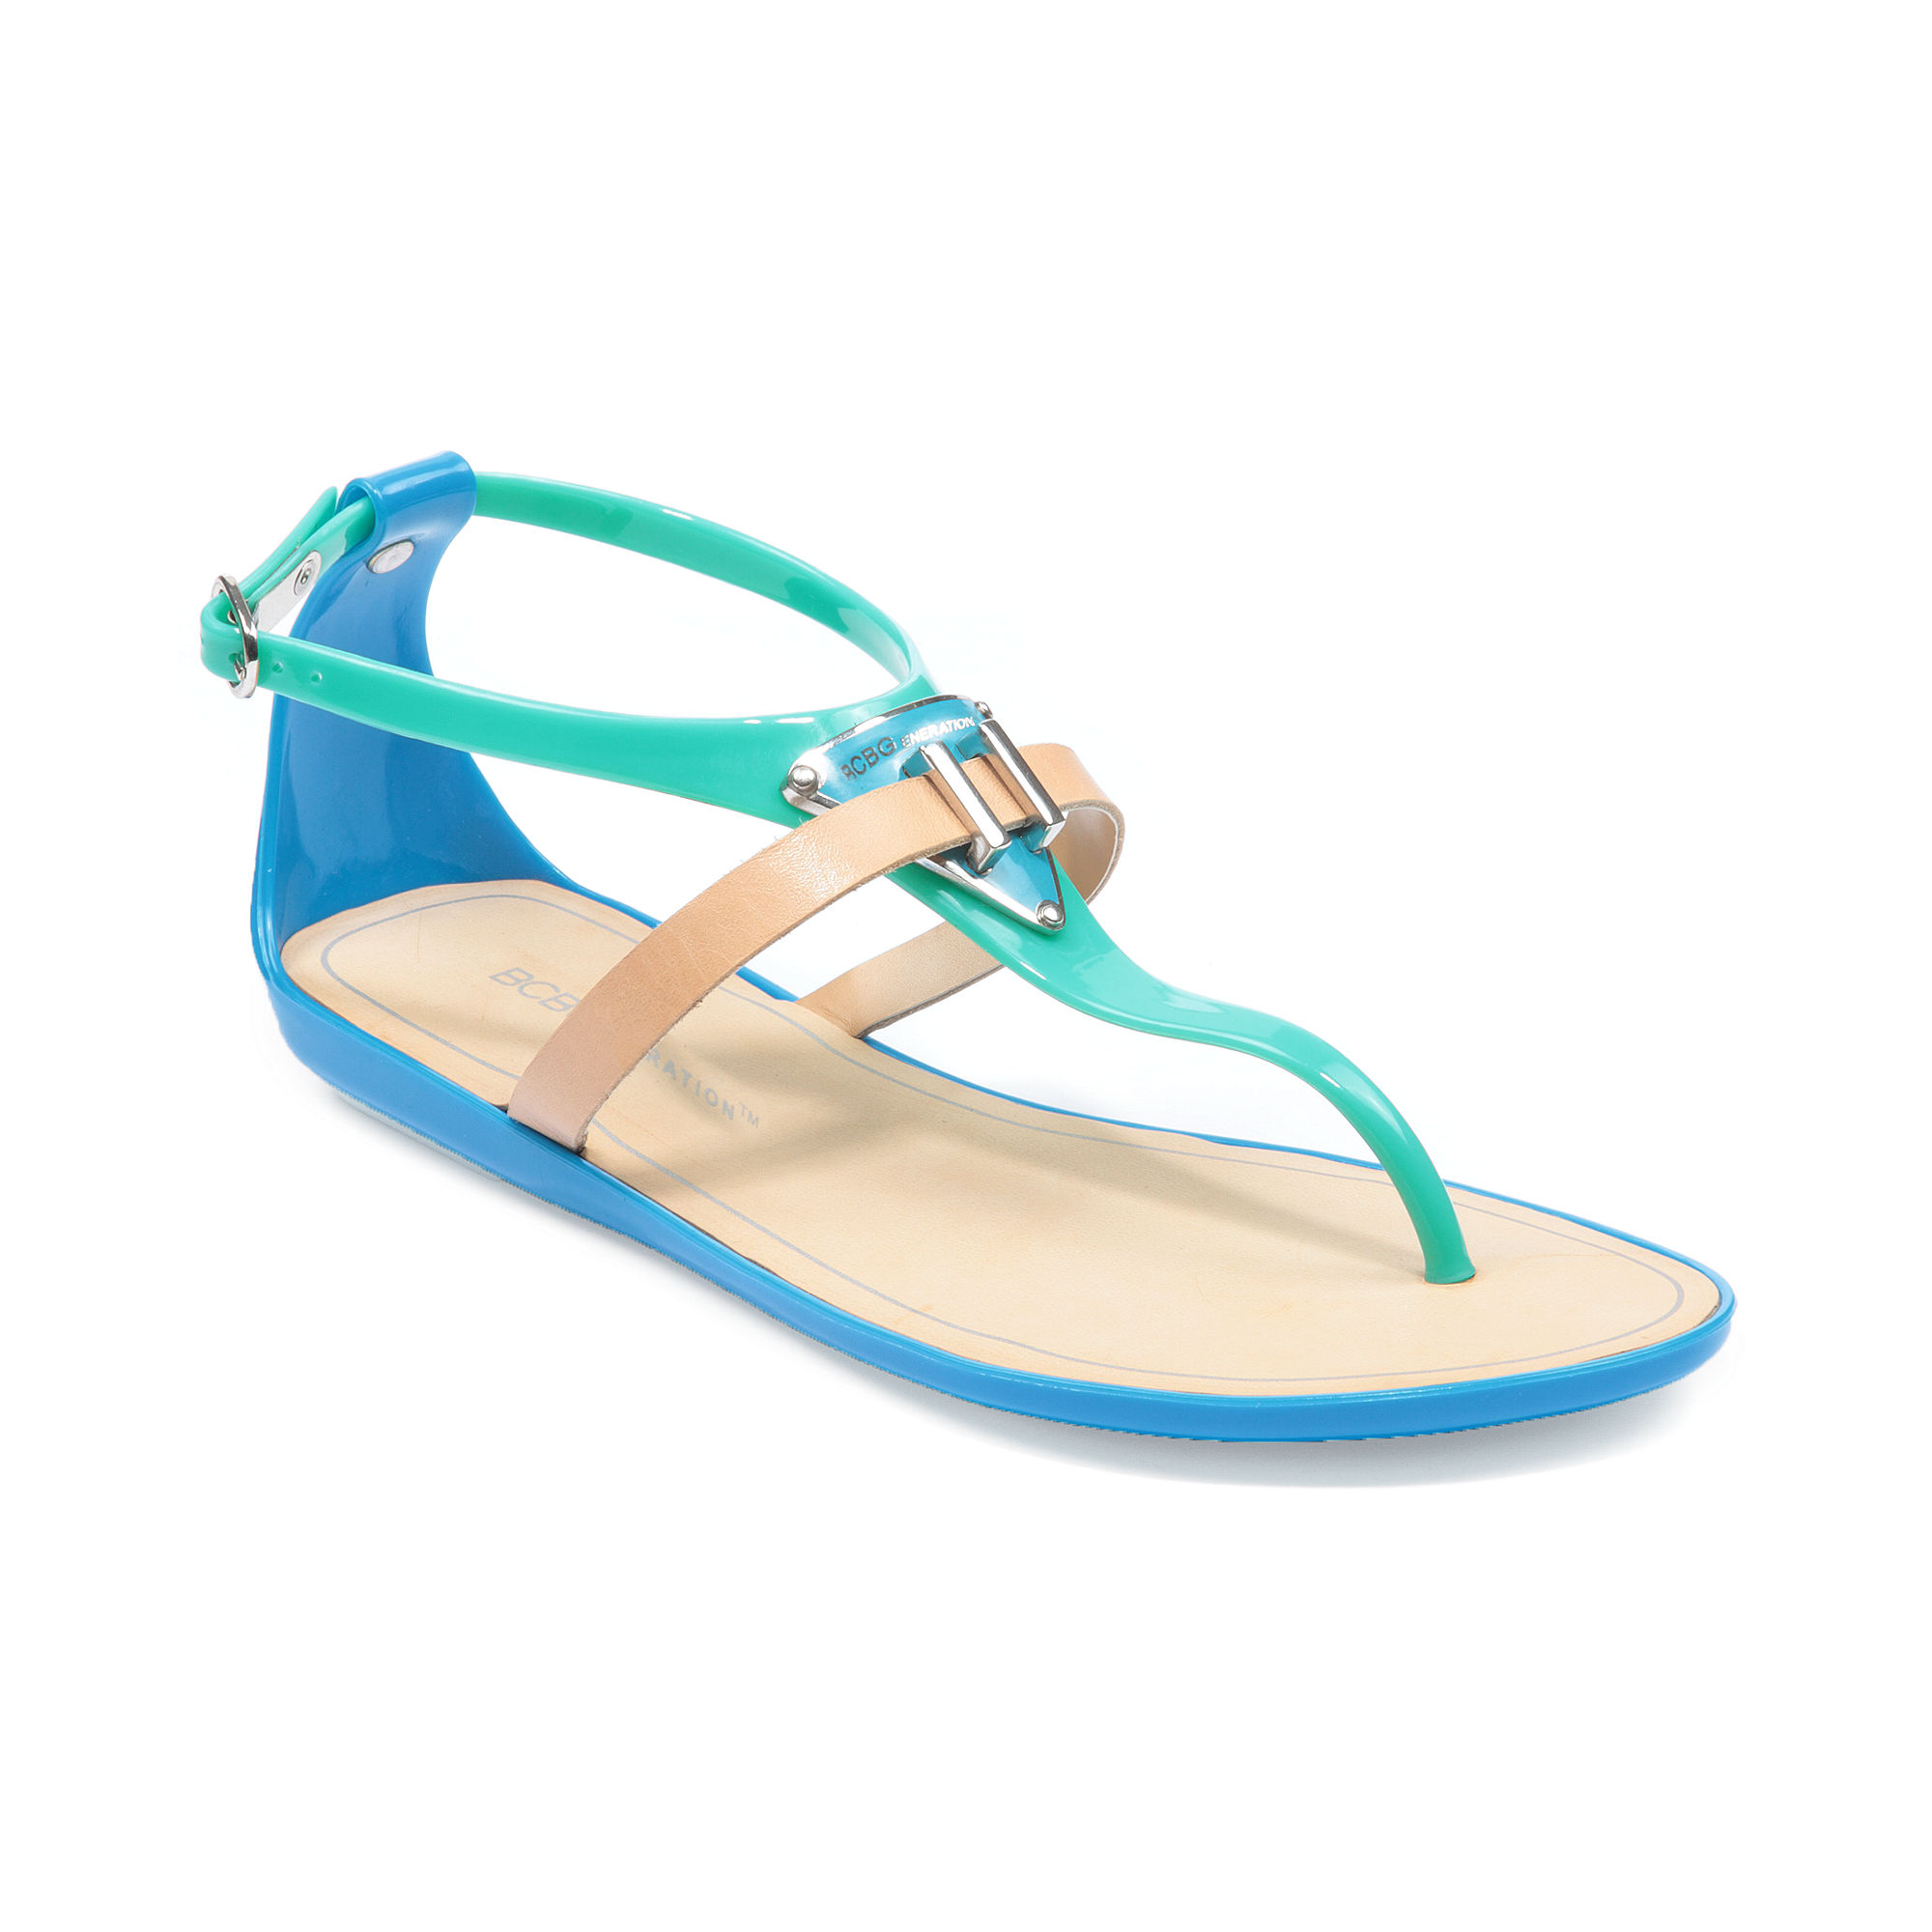 BCBGeneration Calantha Flat Jelly Sandals in Blue - Lyst